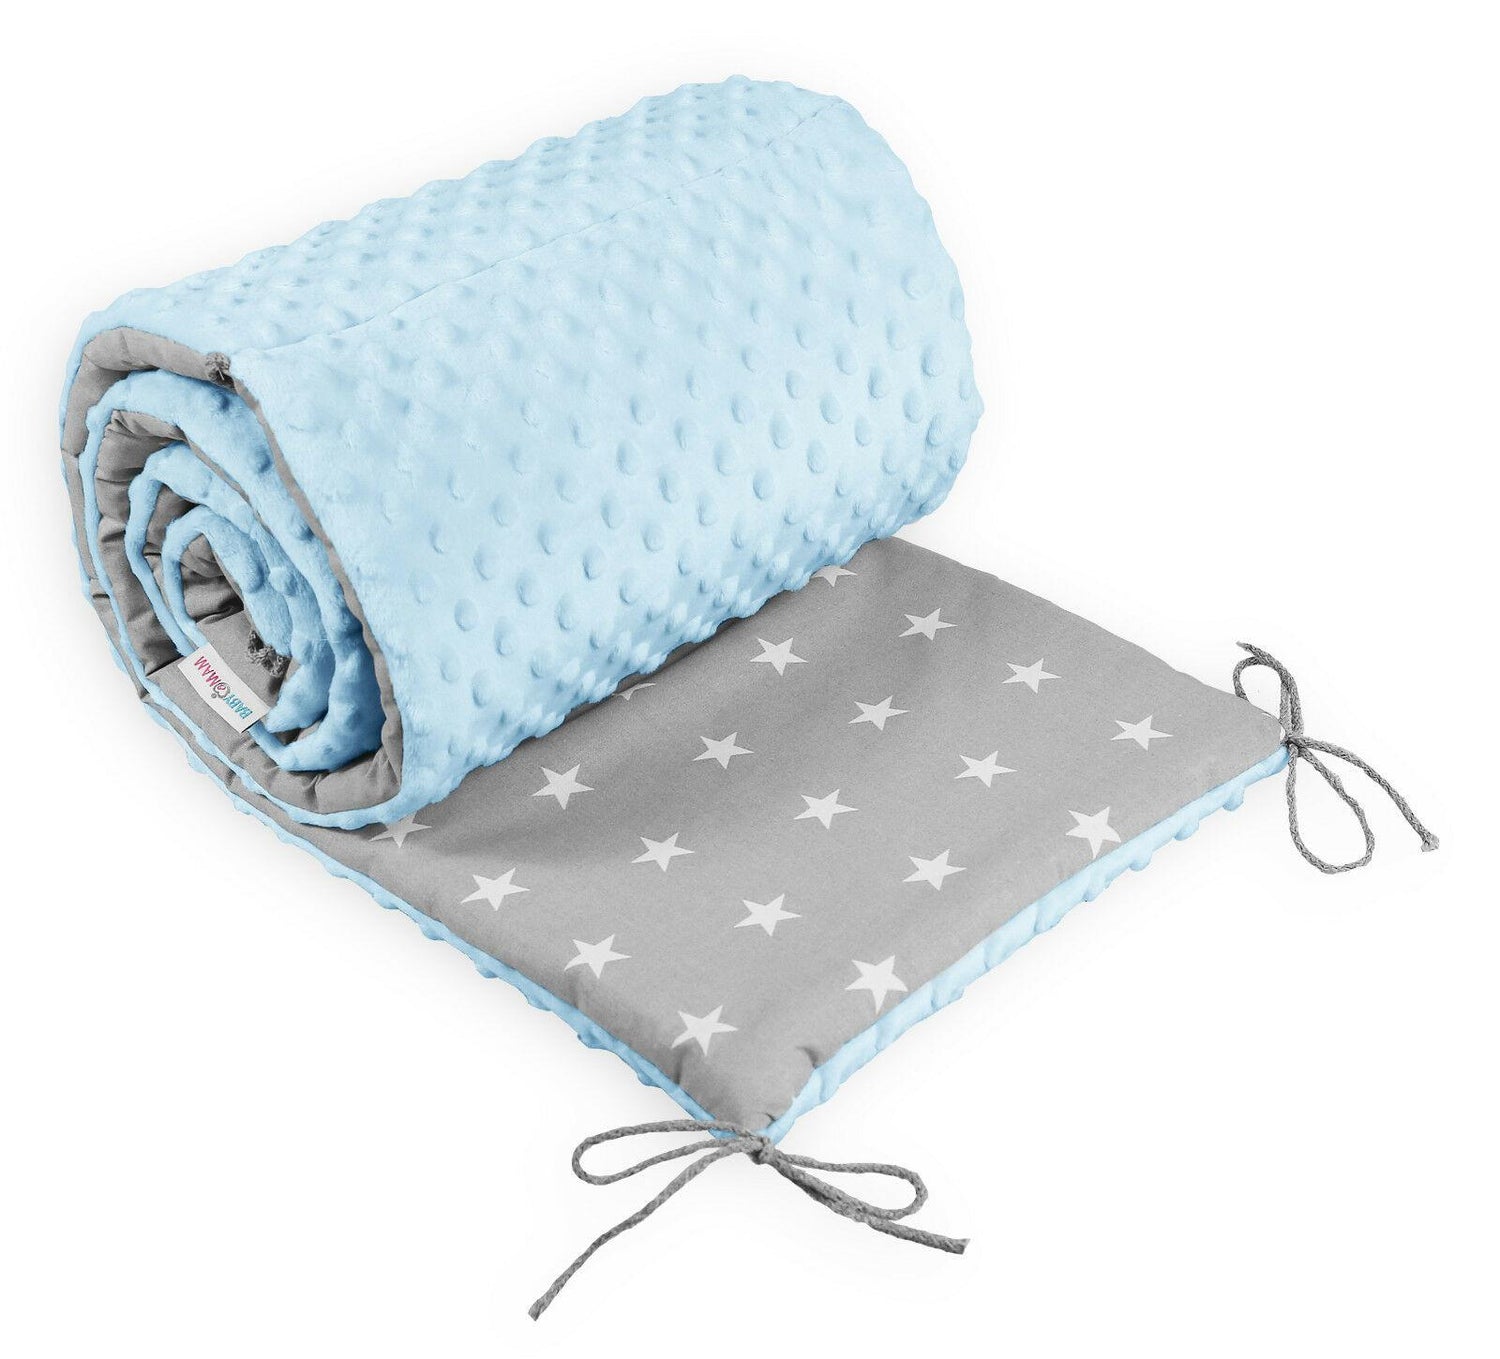 Baby dimple padded bumper nursery protection fit cot bed 140x70 190cm Blue / Small white stars on grey